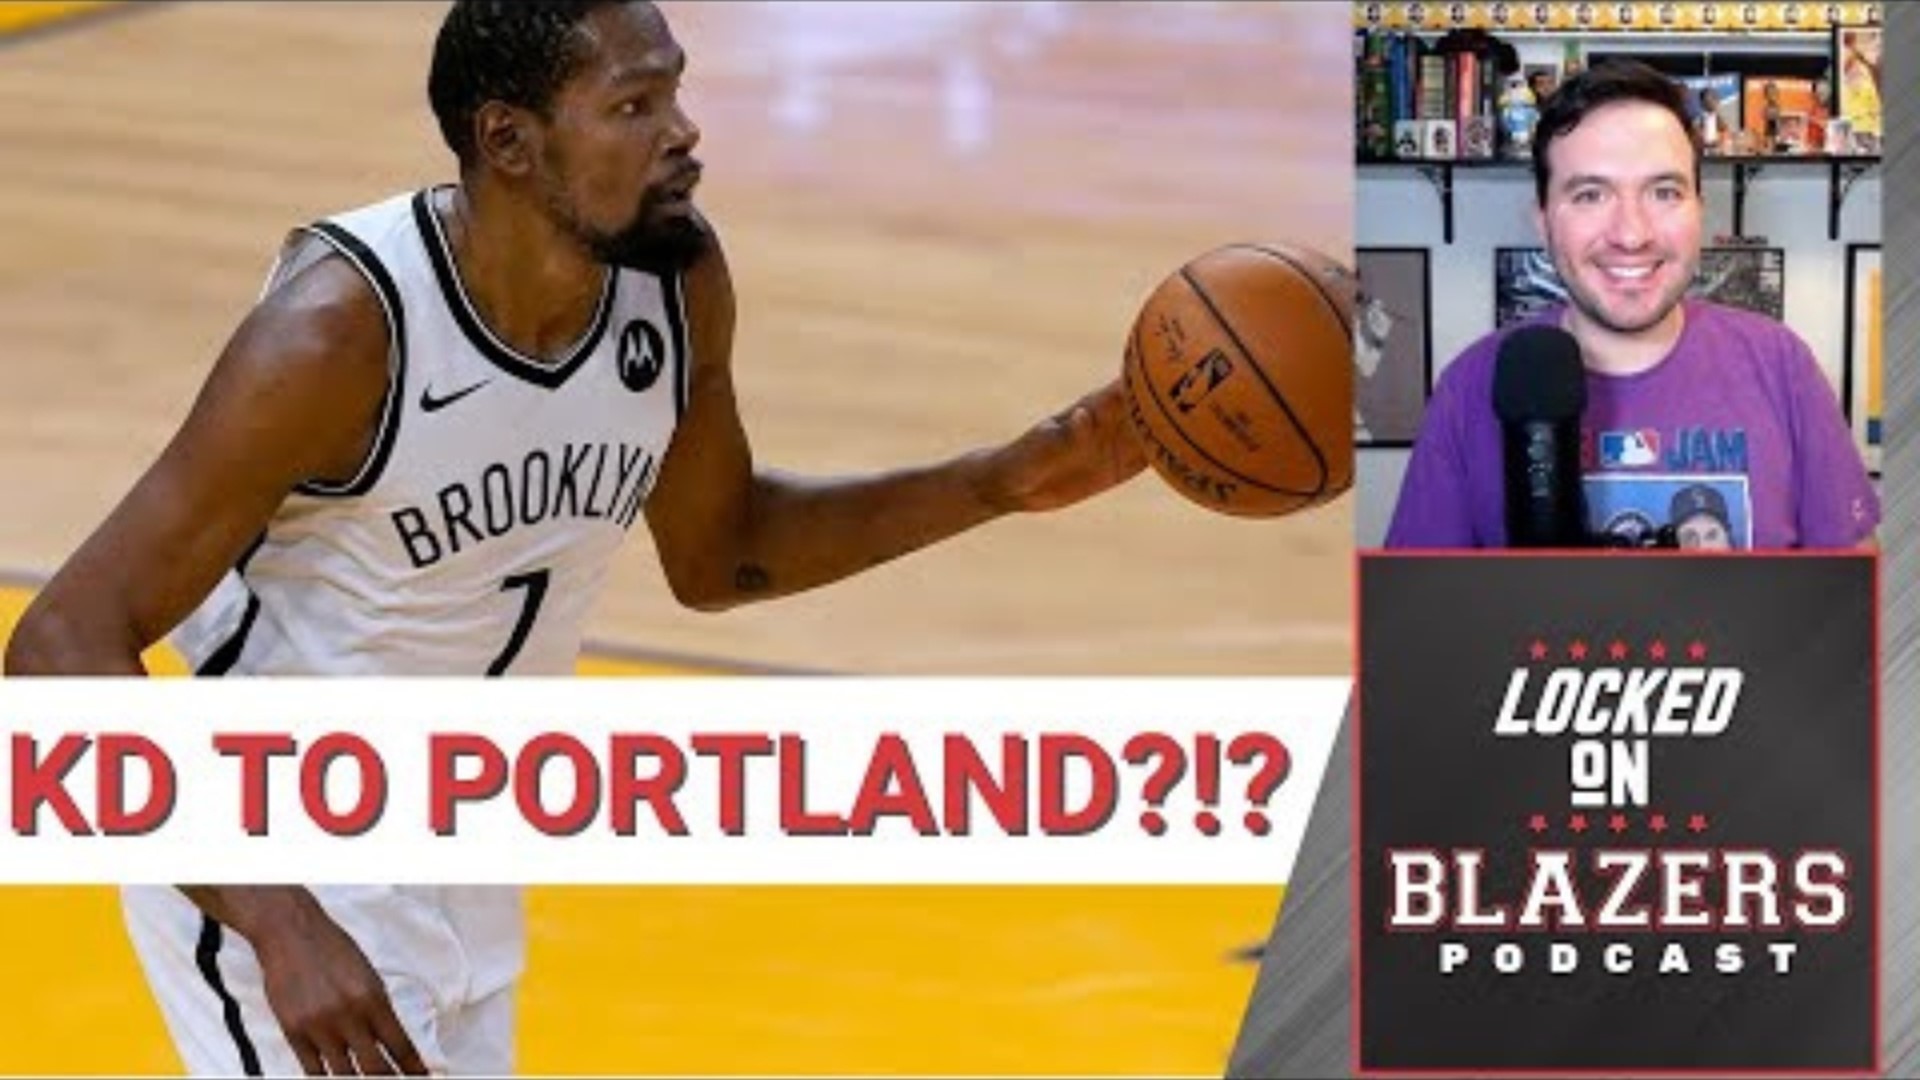 Damian Lillard did his part in starting the KD to Portland fantasy. Could the Blazers swing a trade for Durant? Probably not. No. OK, but let's have some fun anyway.